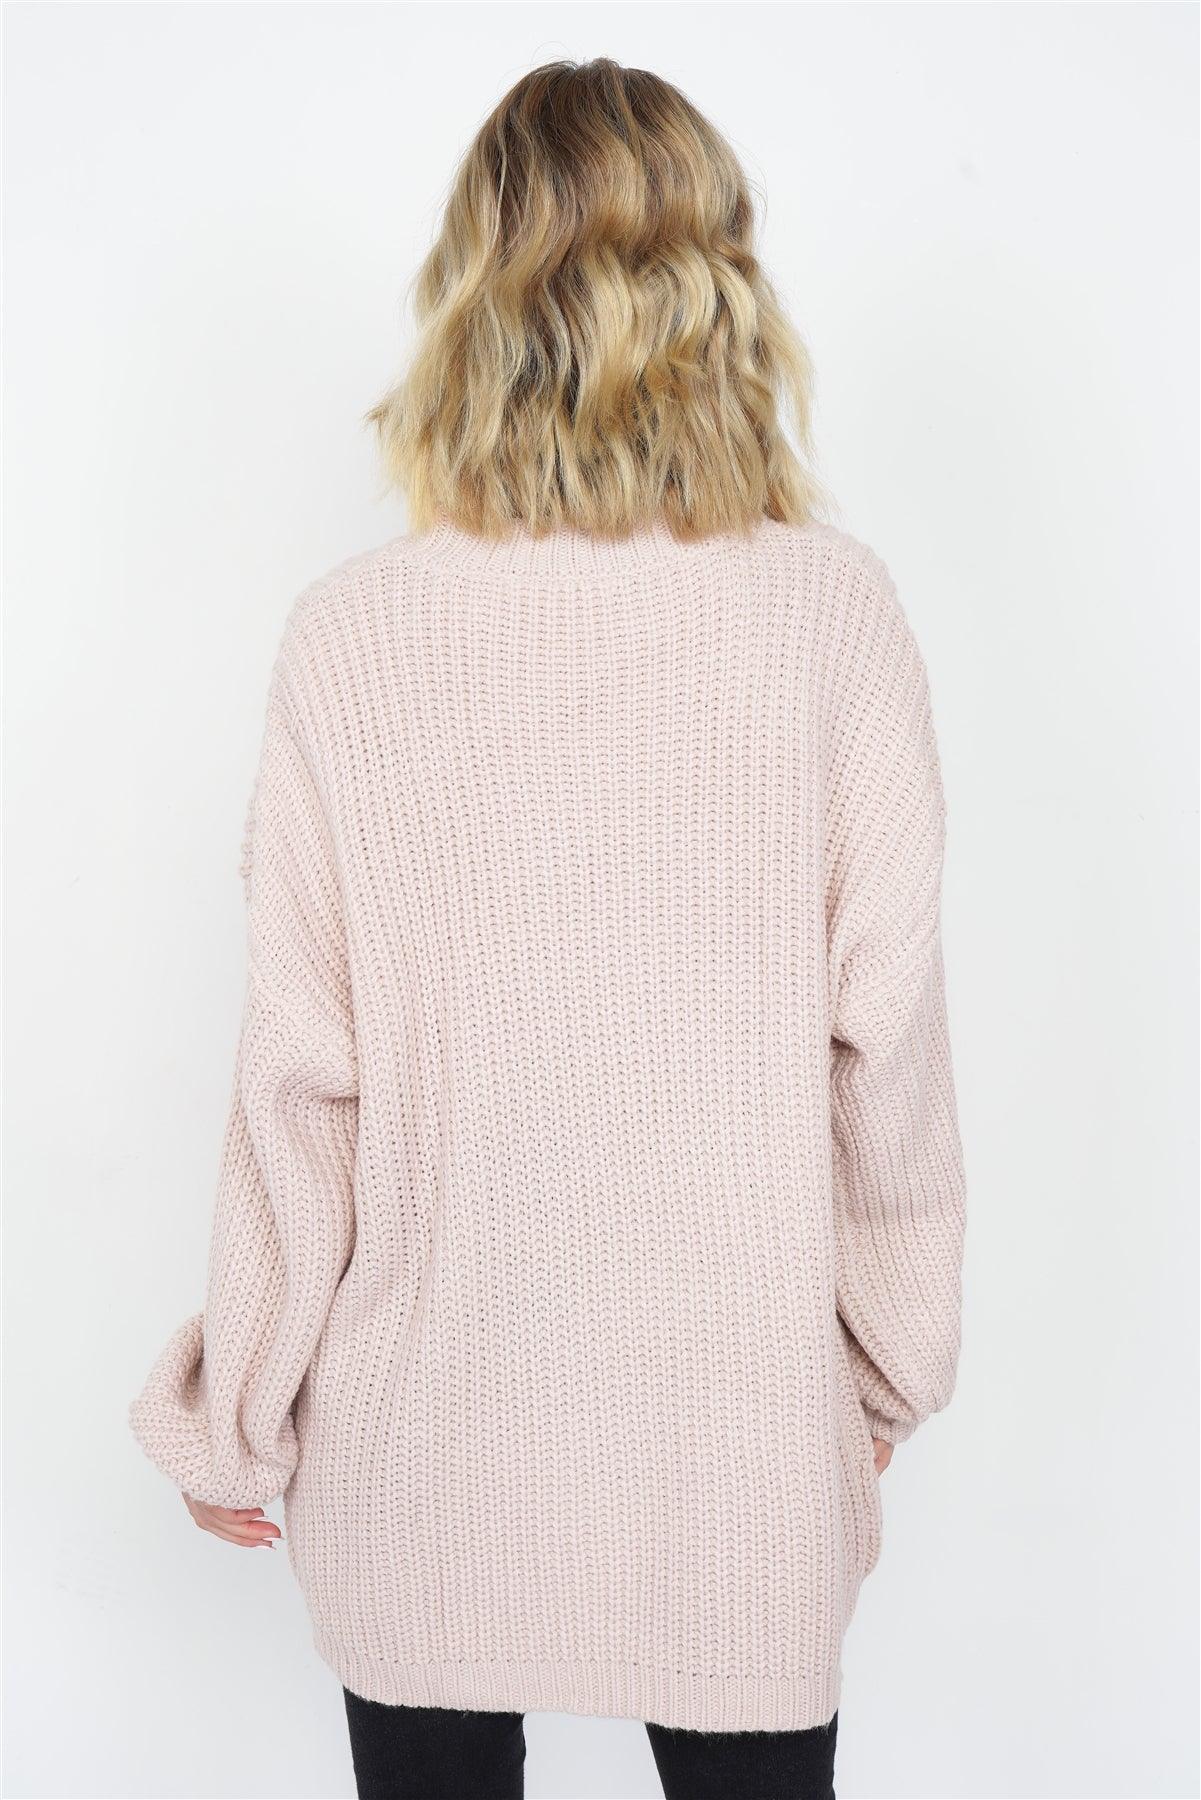 Taupe Rose Knit Relaxed Fit Puff Sleeve Comfy Sweater